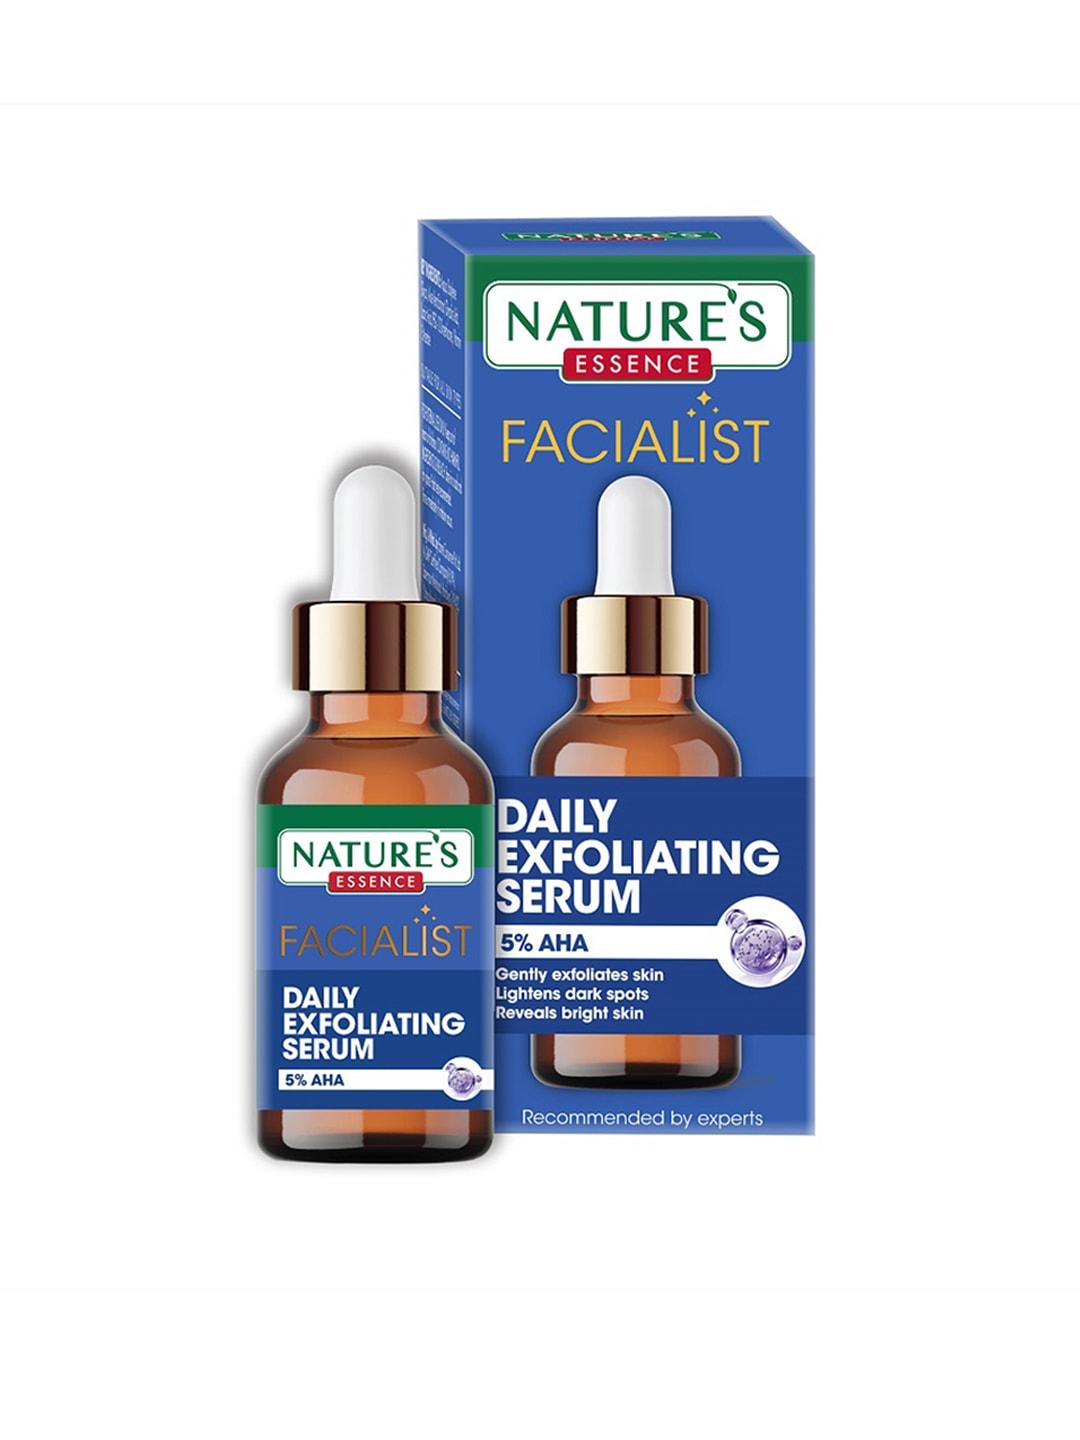 Natures Essence Facialist Daily Exfoliating Serum with 5% AHA & Aloevera Extract - 30 ml